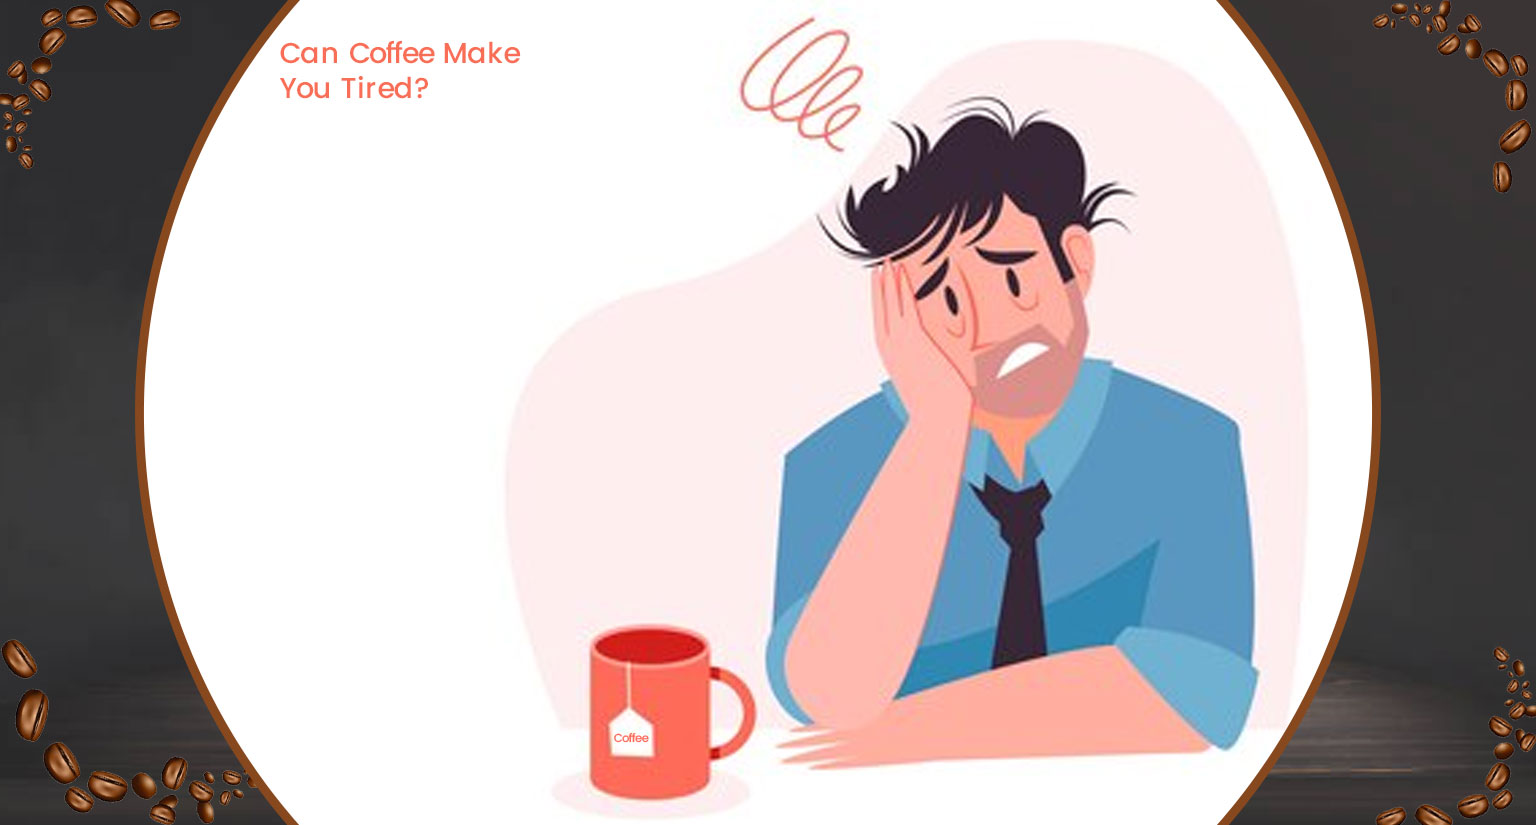 Can Coffee Make You Tired